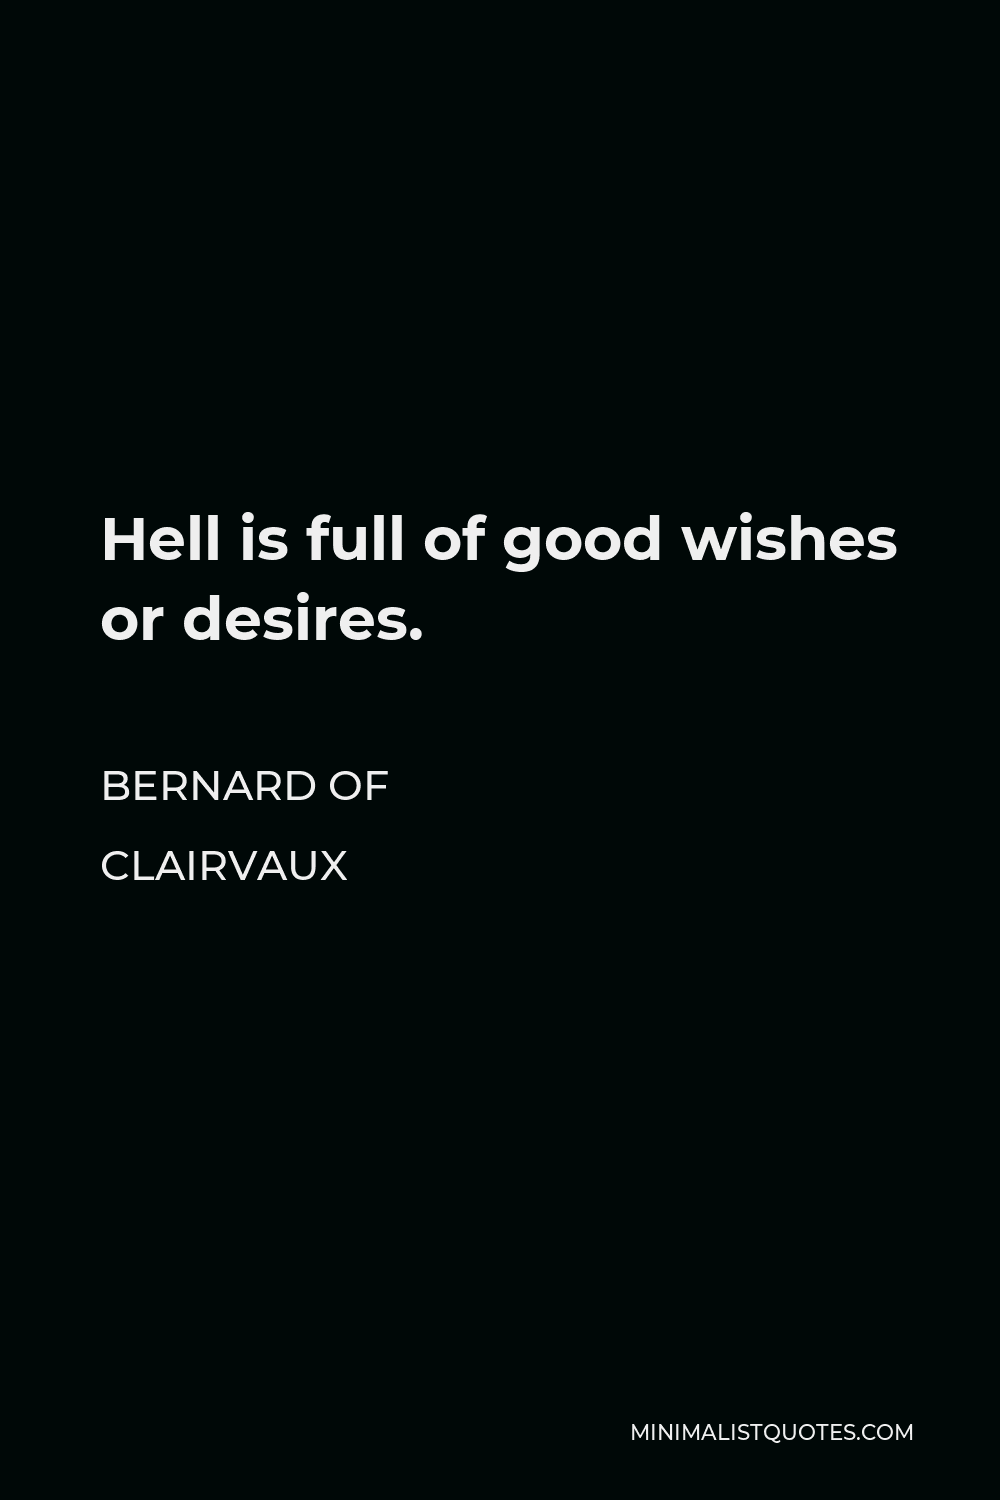 Bernard of Clairvaux Quote - Hell is full of good wishes or desires.